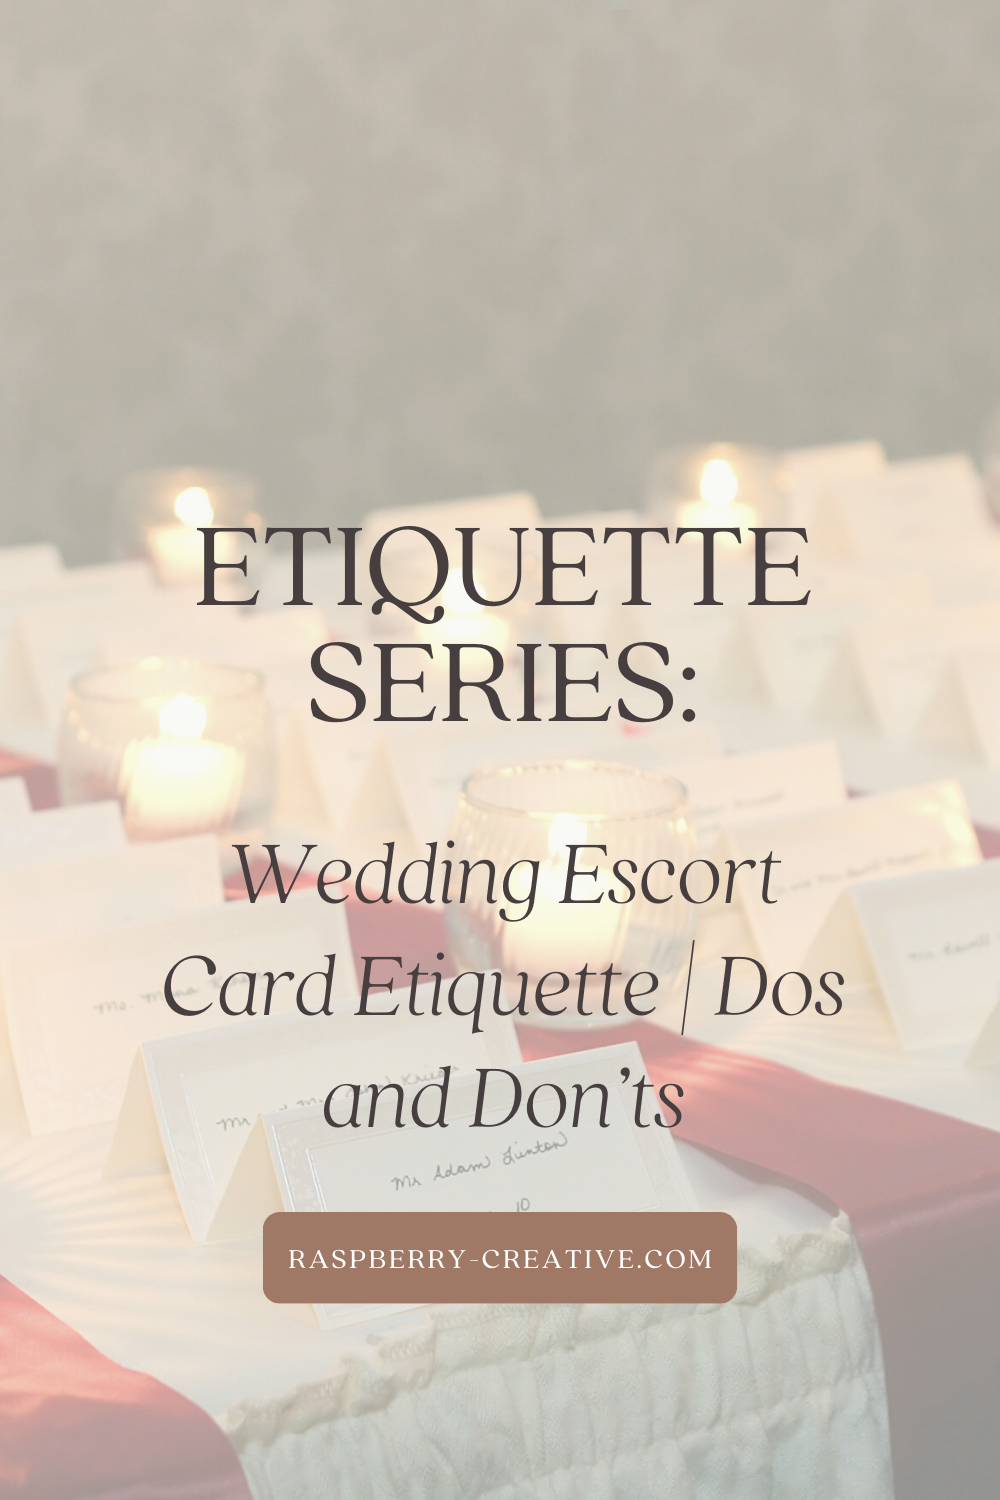 etiquette series dos and don'ts of wedding escort card